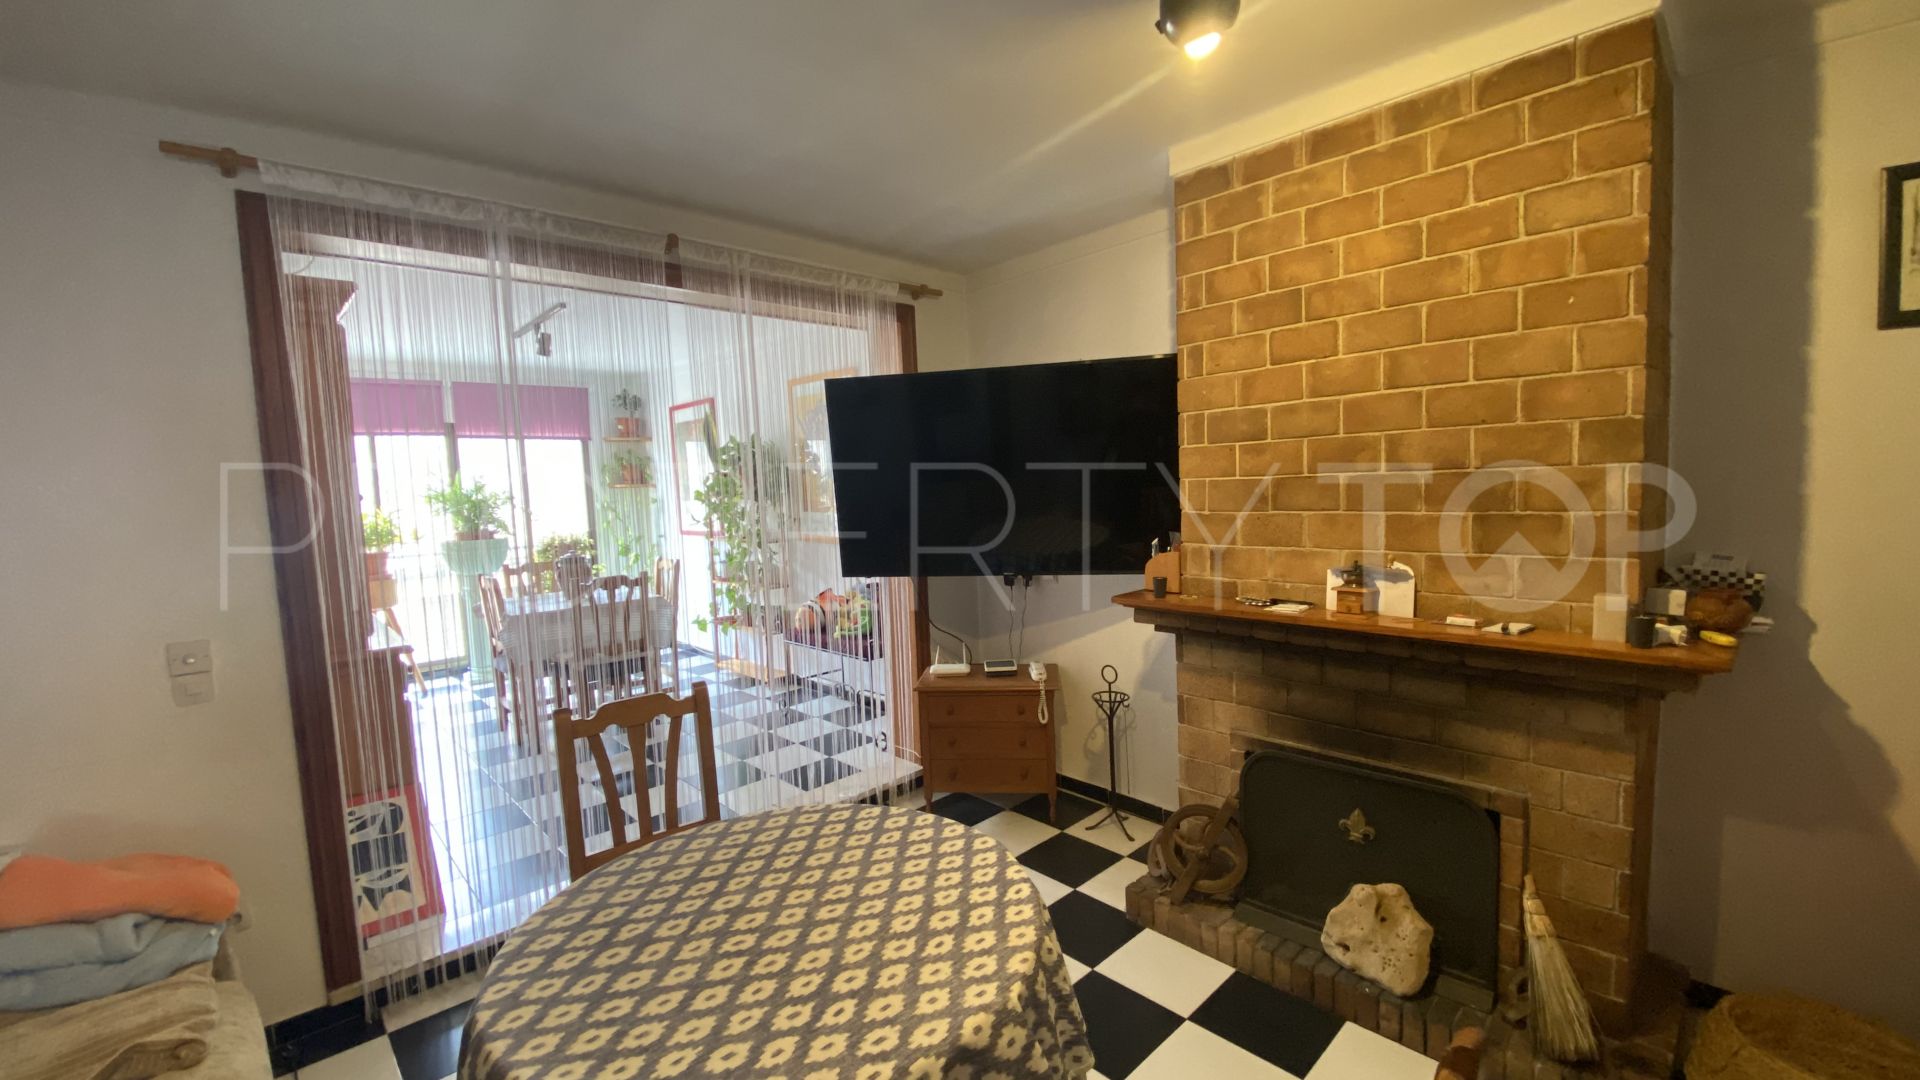 Apartment with 3 bedrooms for sale in Muro